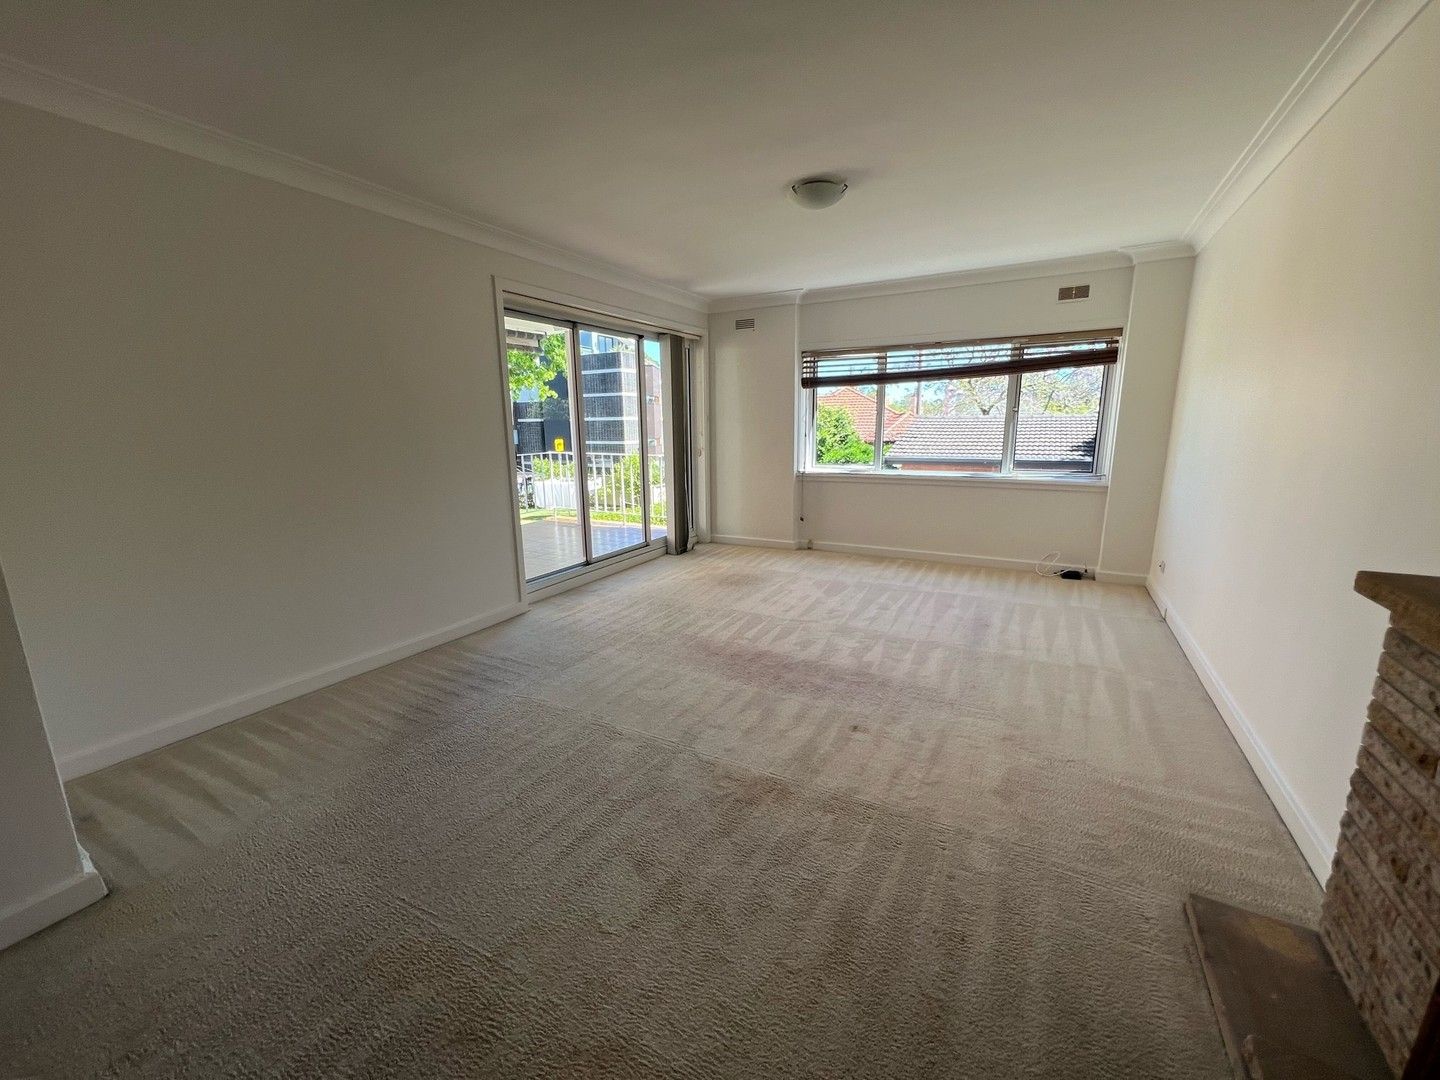 2 bedrooms Apartment / Unit / Flat in 2/24 Crows Nest Road WAVERTON NSW, 2060